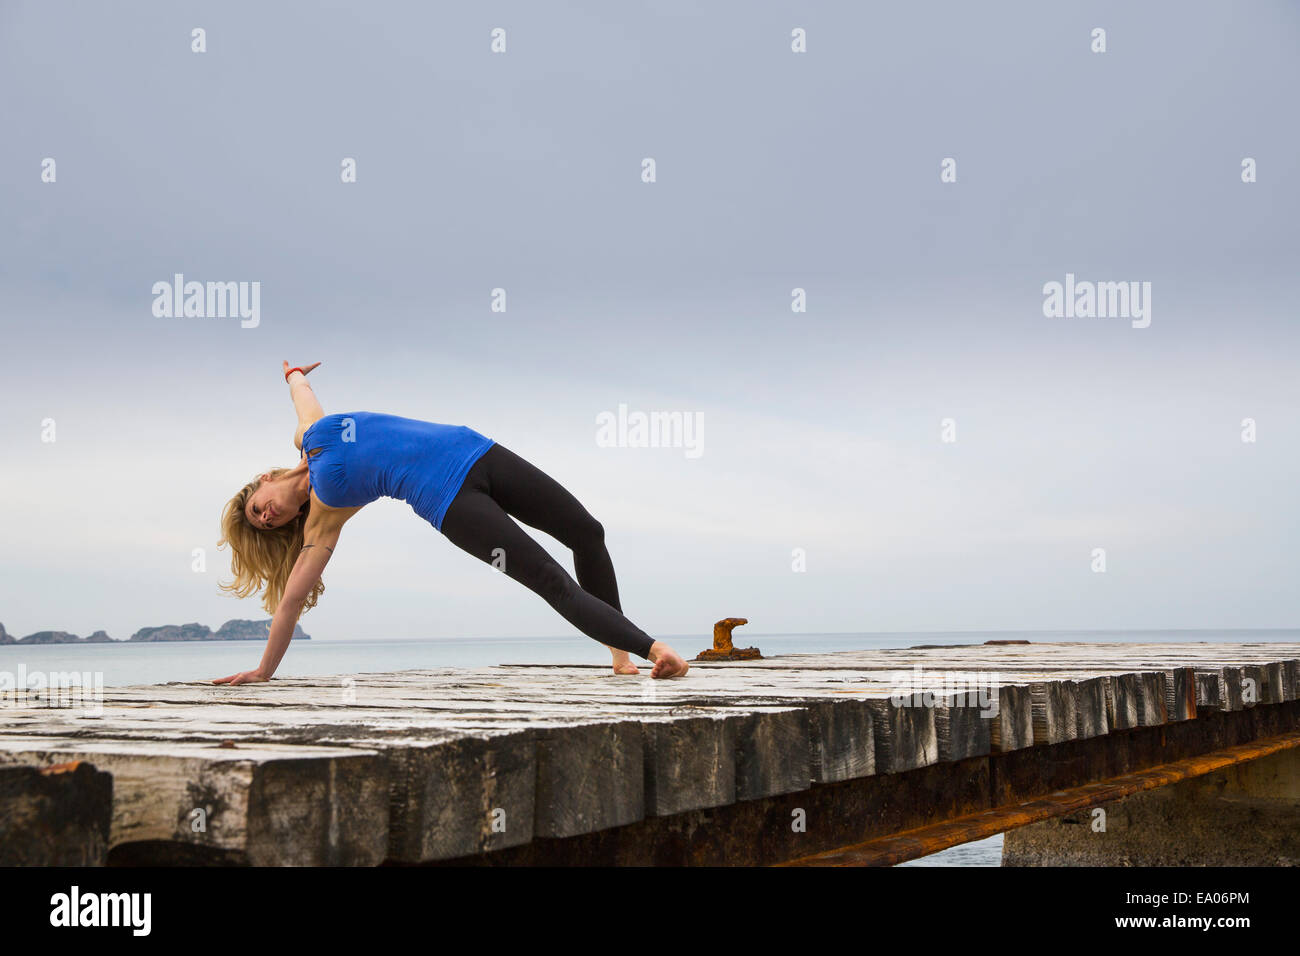 Mid adult woman practicing yoga move on wooden sea pier Stock Photo